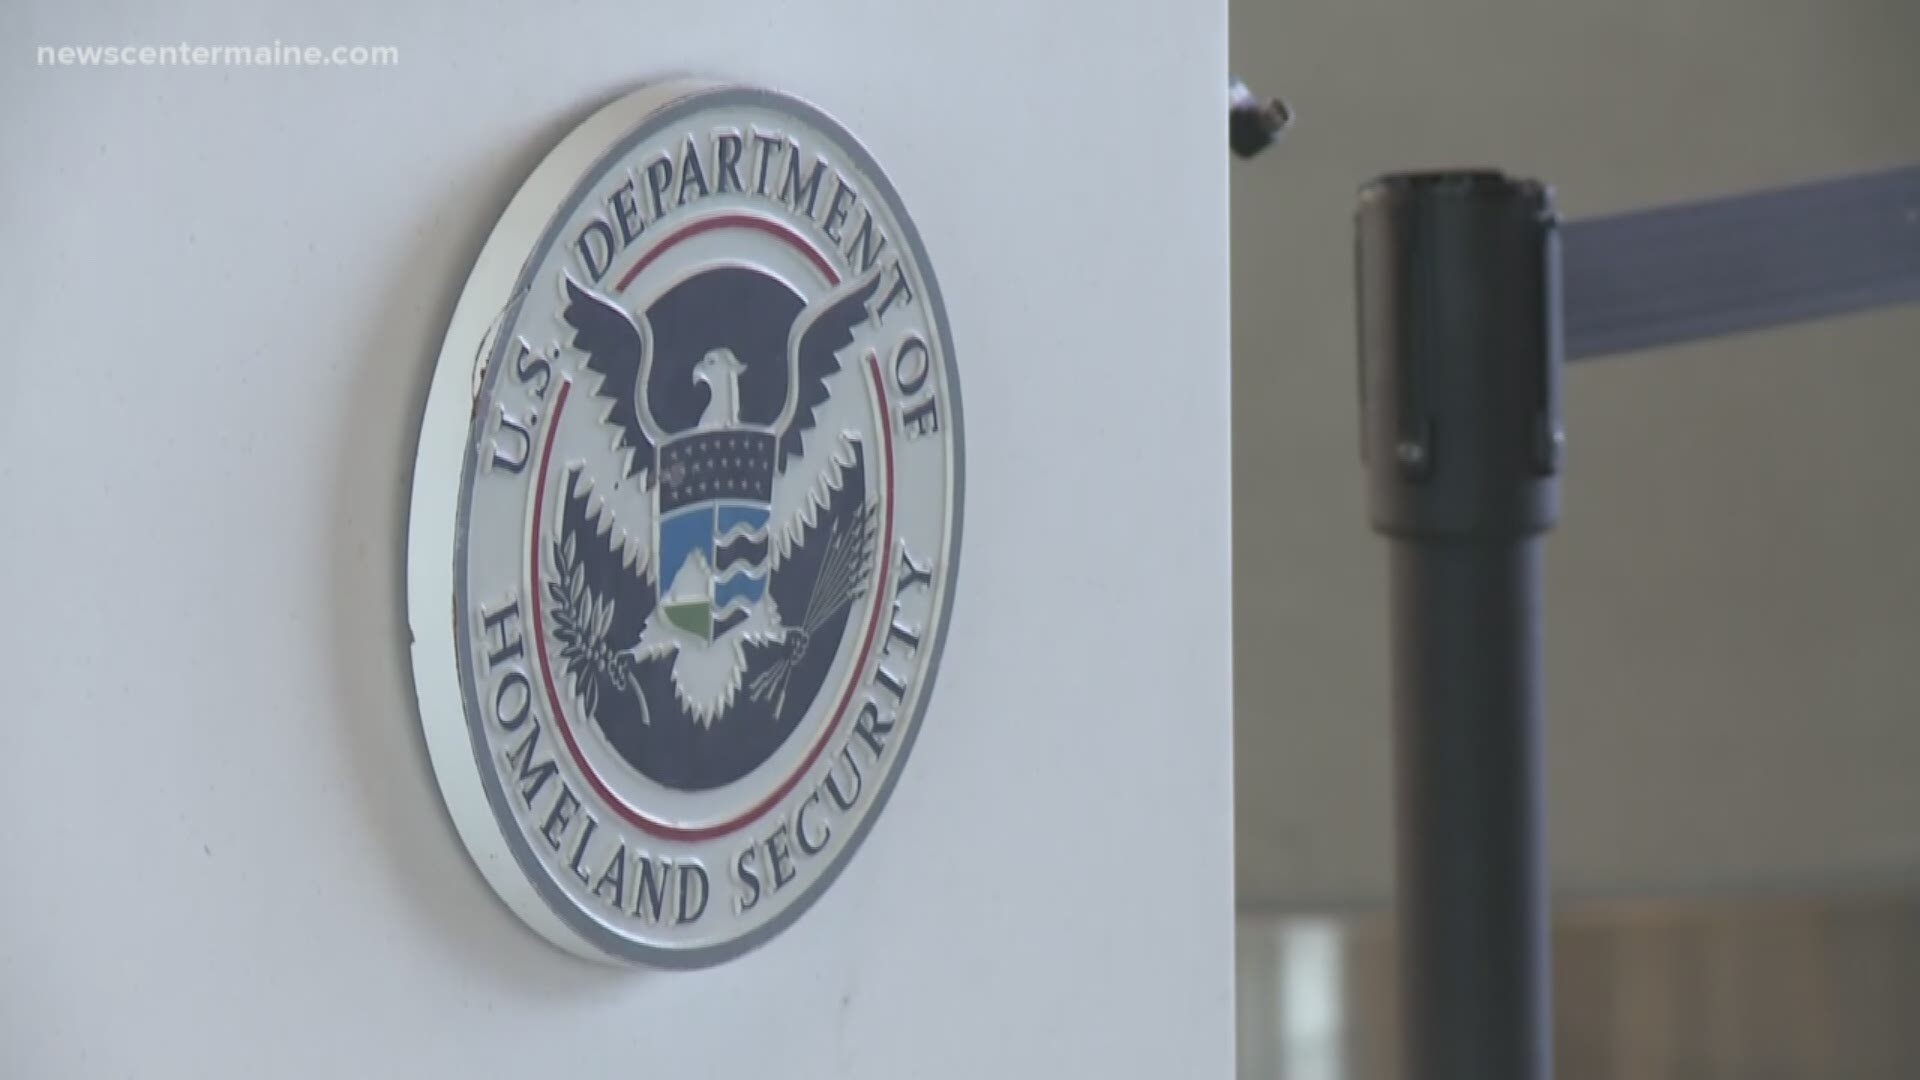 NOW: REAL ID compliance deadline about a month away